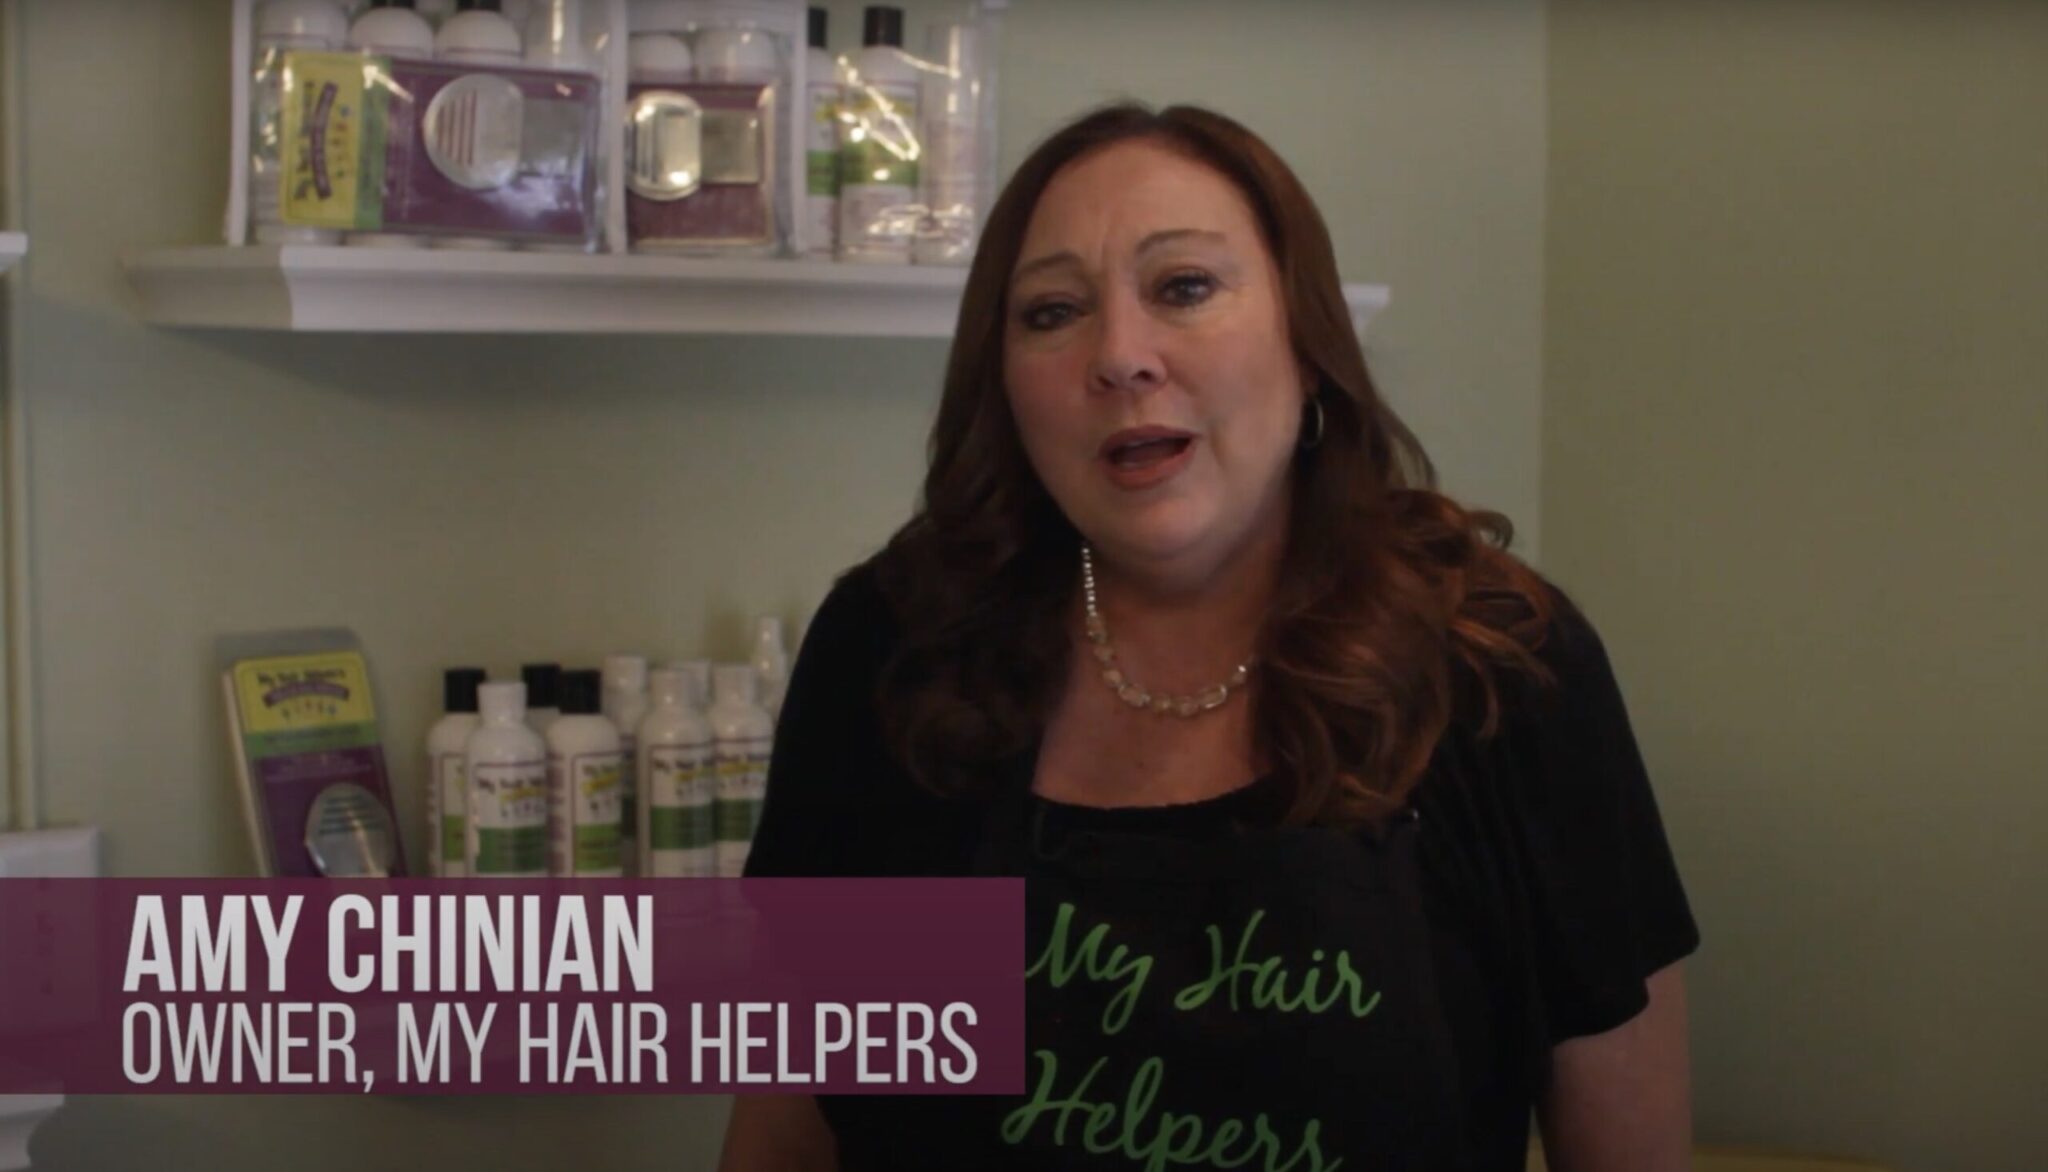 Amy Chinian, Owner of My Hair Helpers